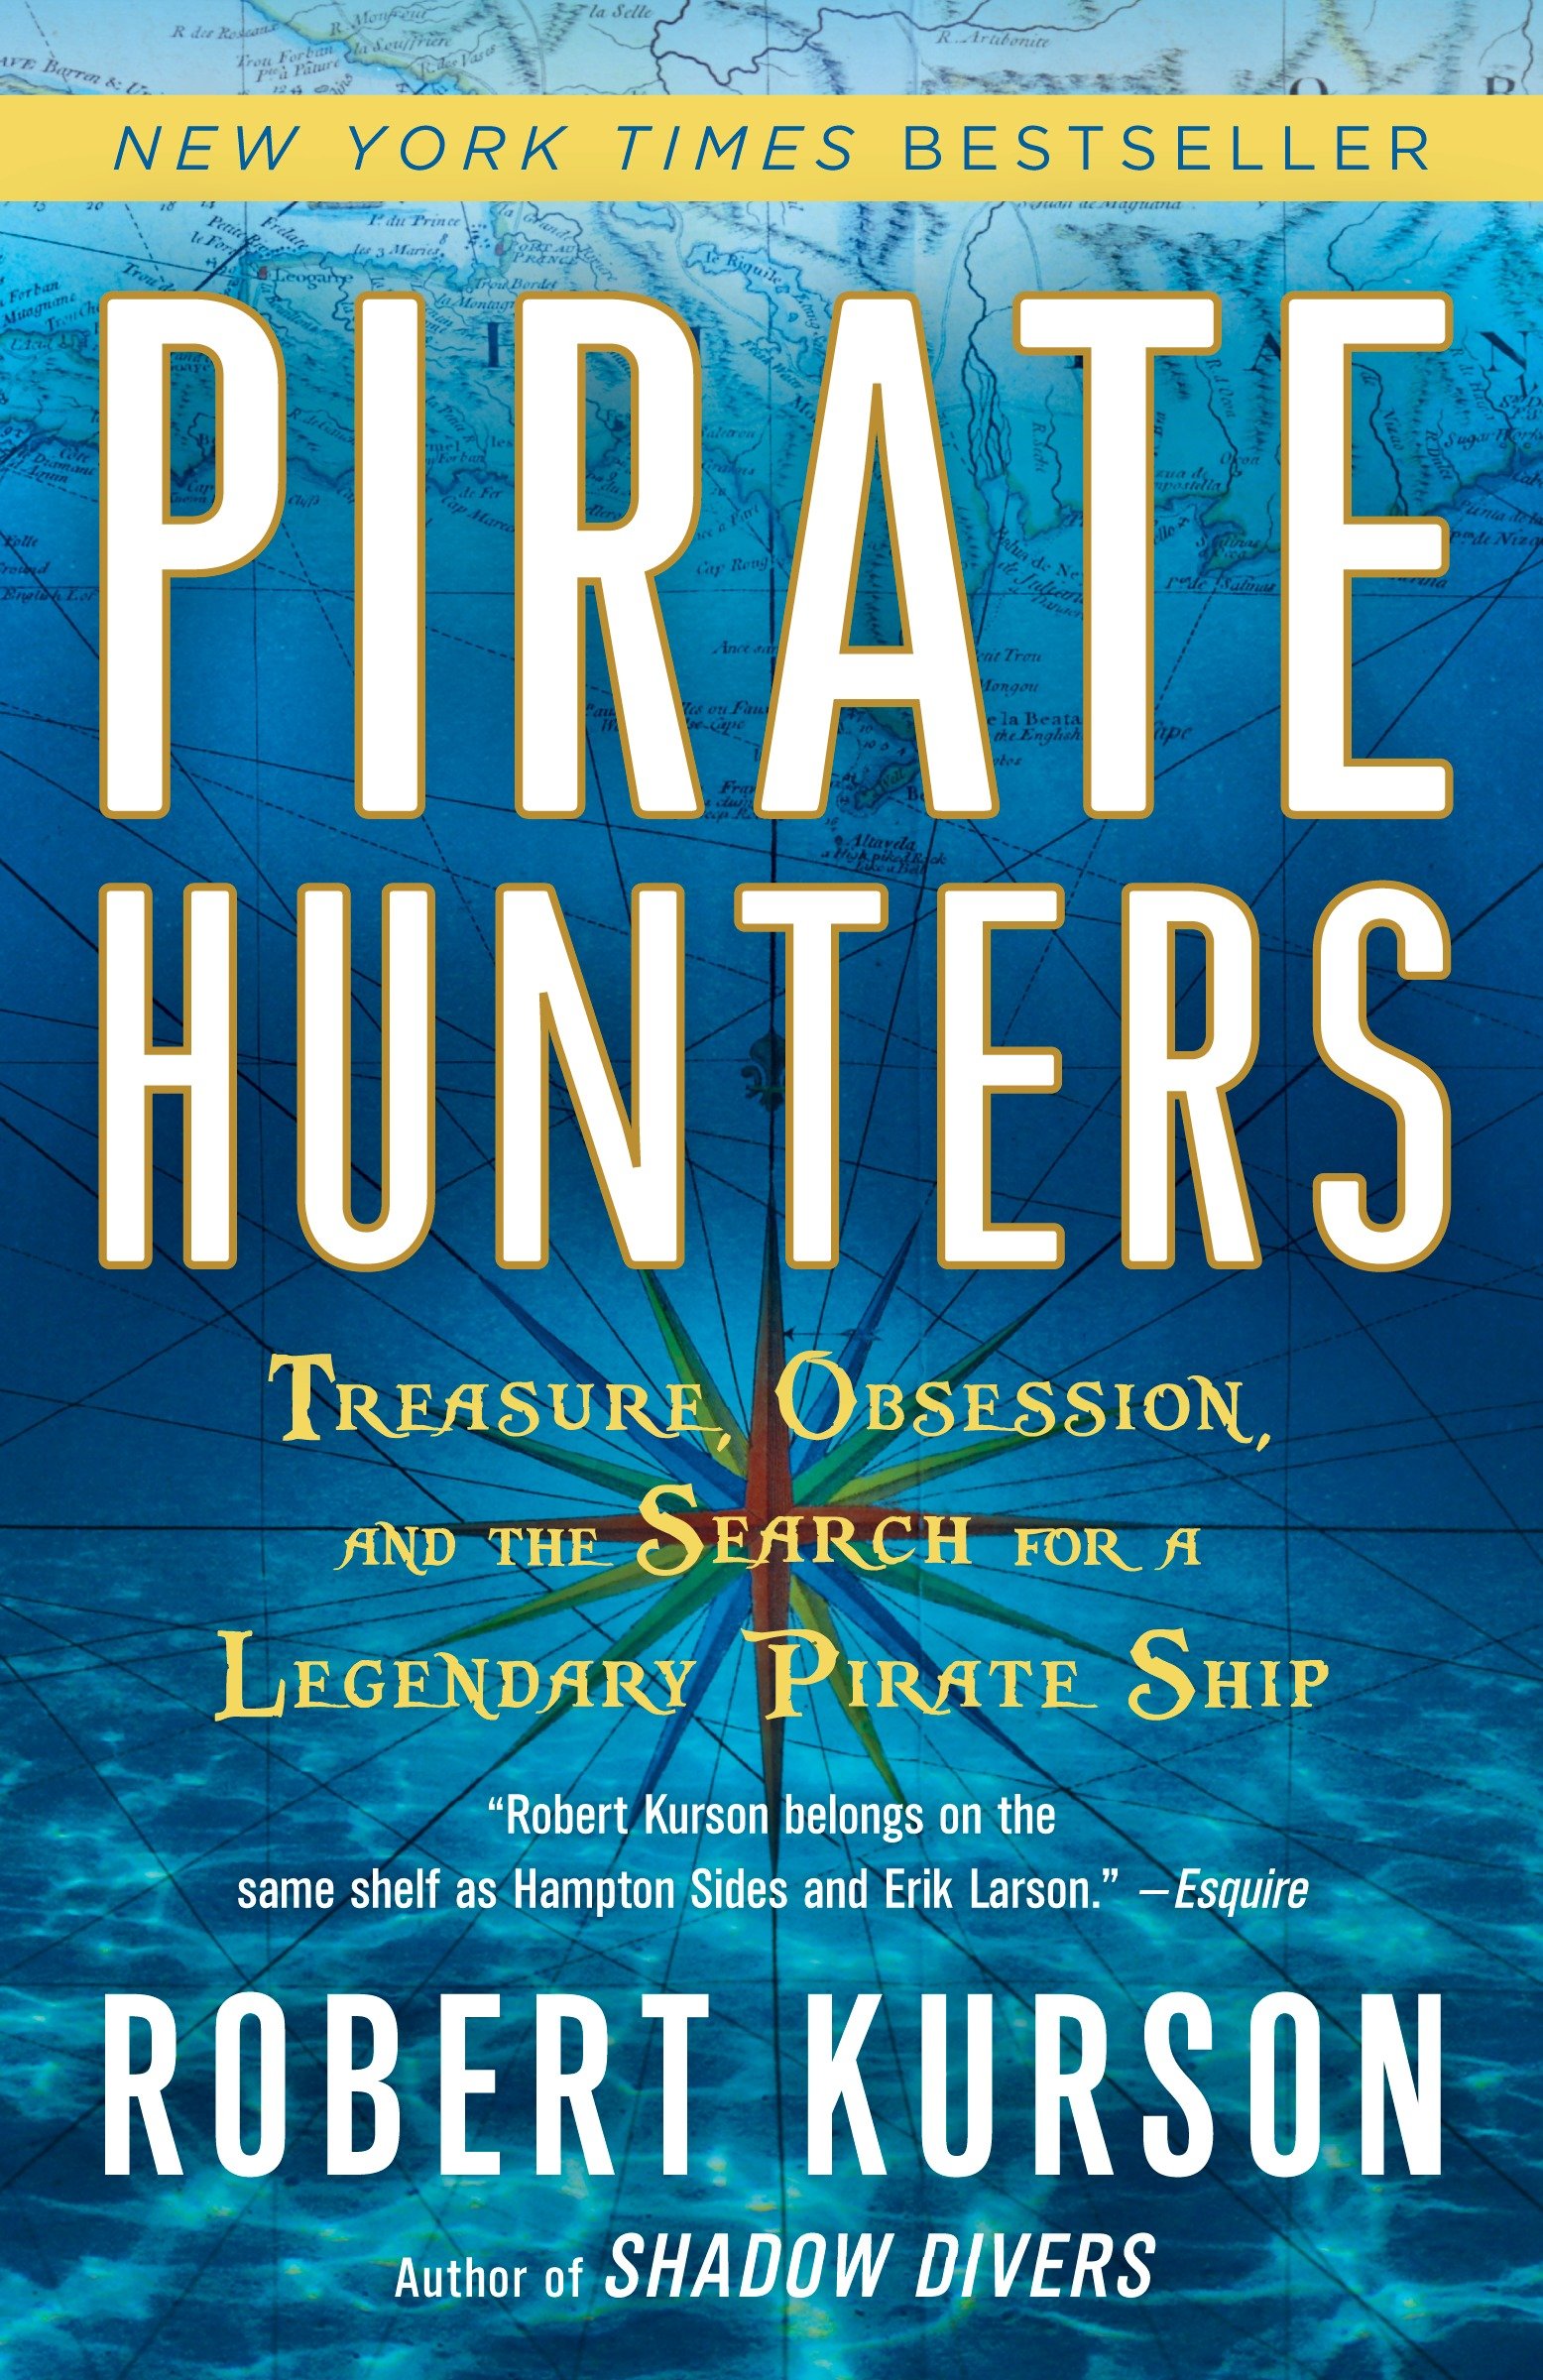 Image de couverture de Pirate Hunters [electronic resource] : Treasure, Obsession, and the Search for a Legendary Pirate Ship